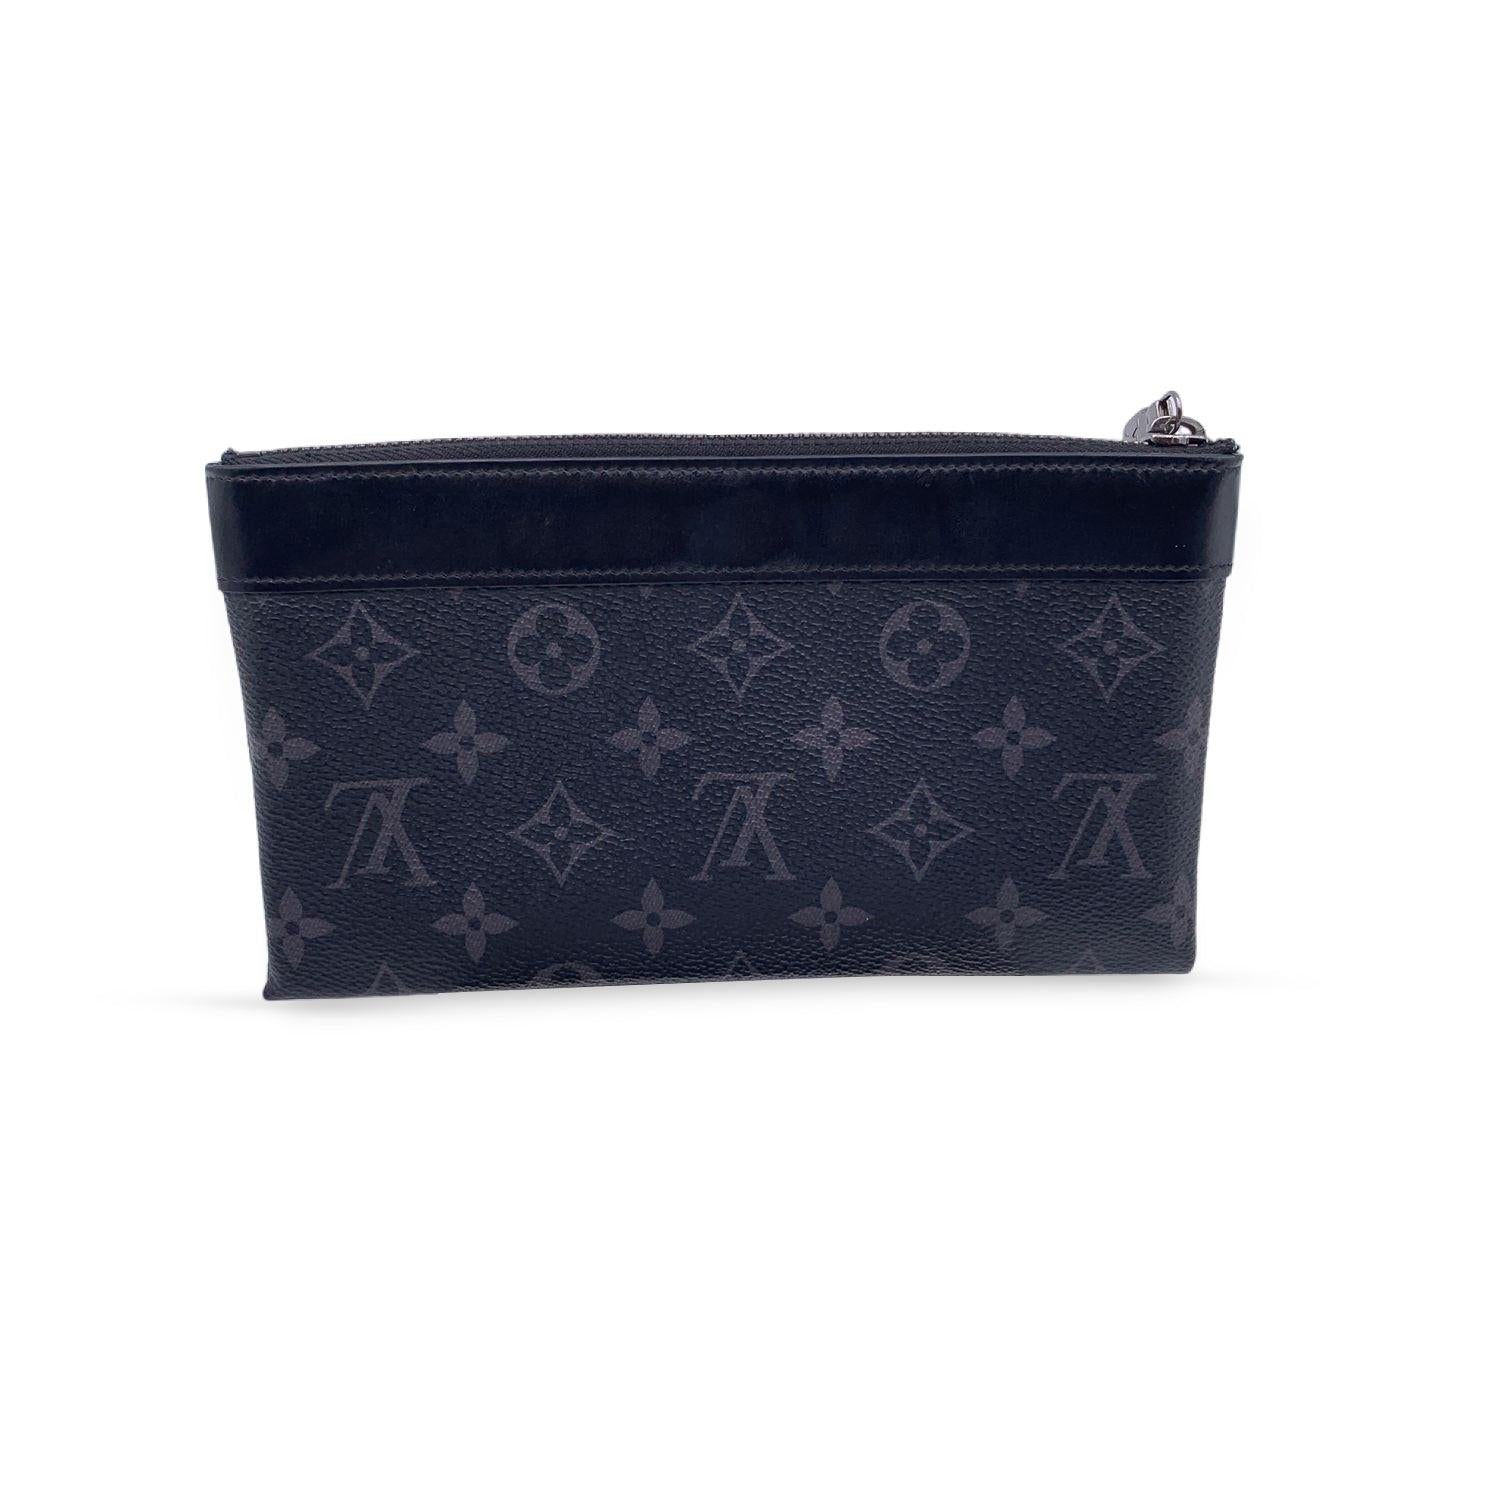 This beautiful Bag will come with a Certificate of Authenticity provided by Entrupy. The certificate will be provided at no further cost LOUIS VUITTON 'Pochette Discovery' clutch in Eclipse monogram canvas. Silver metal D-ring on the front. Upper